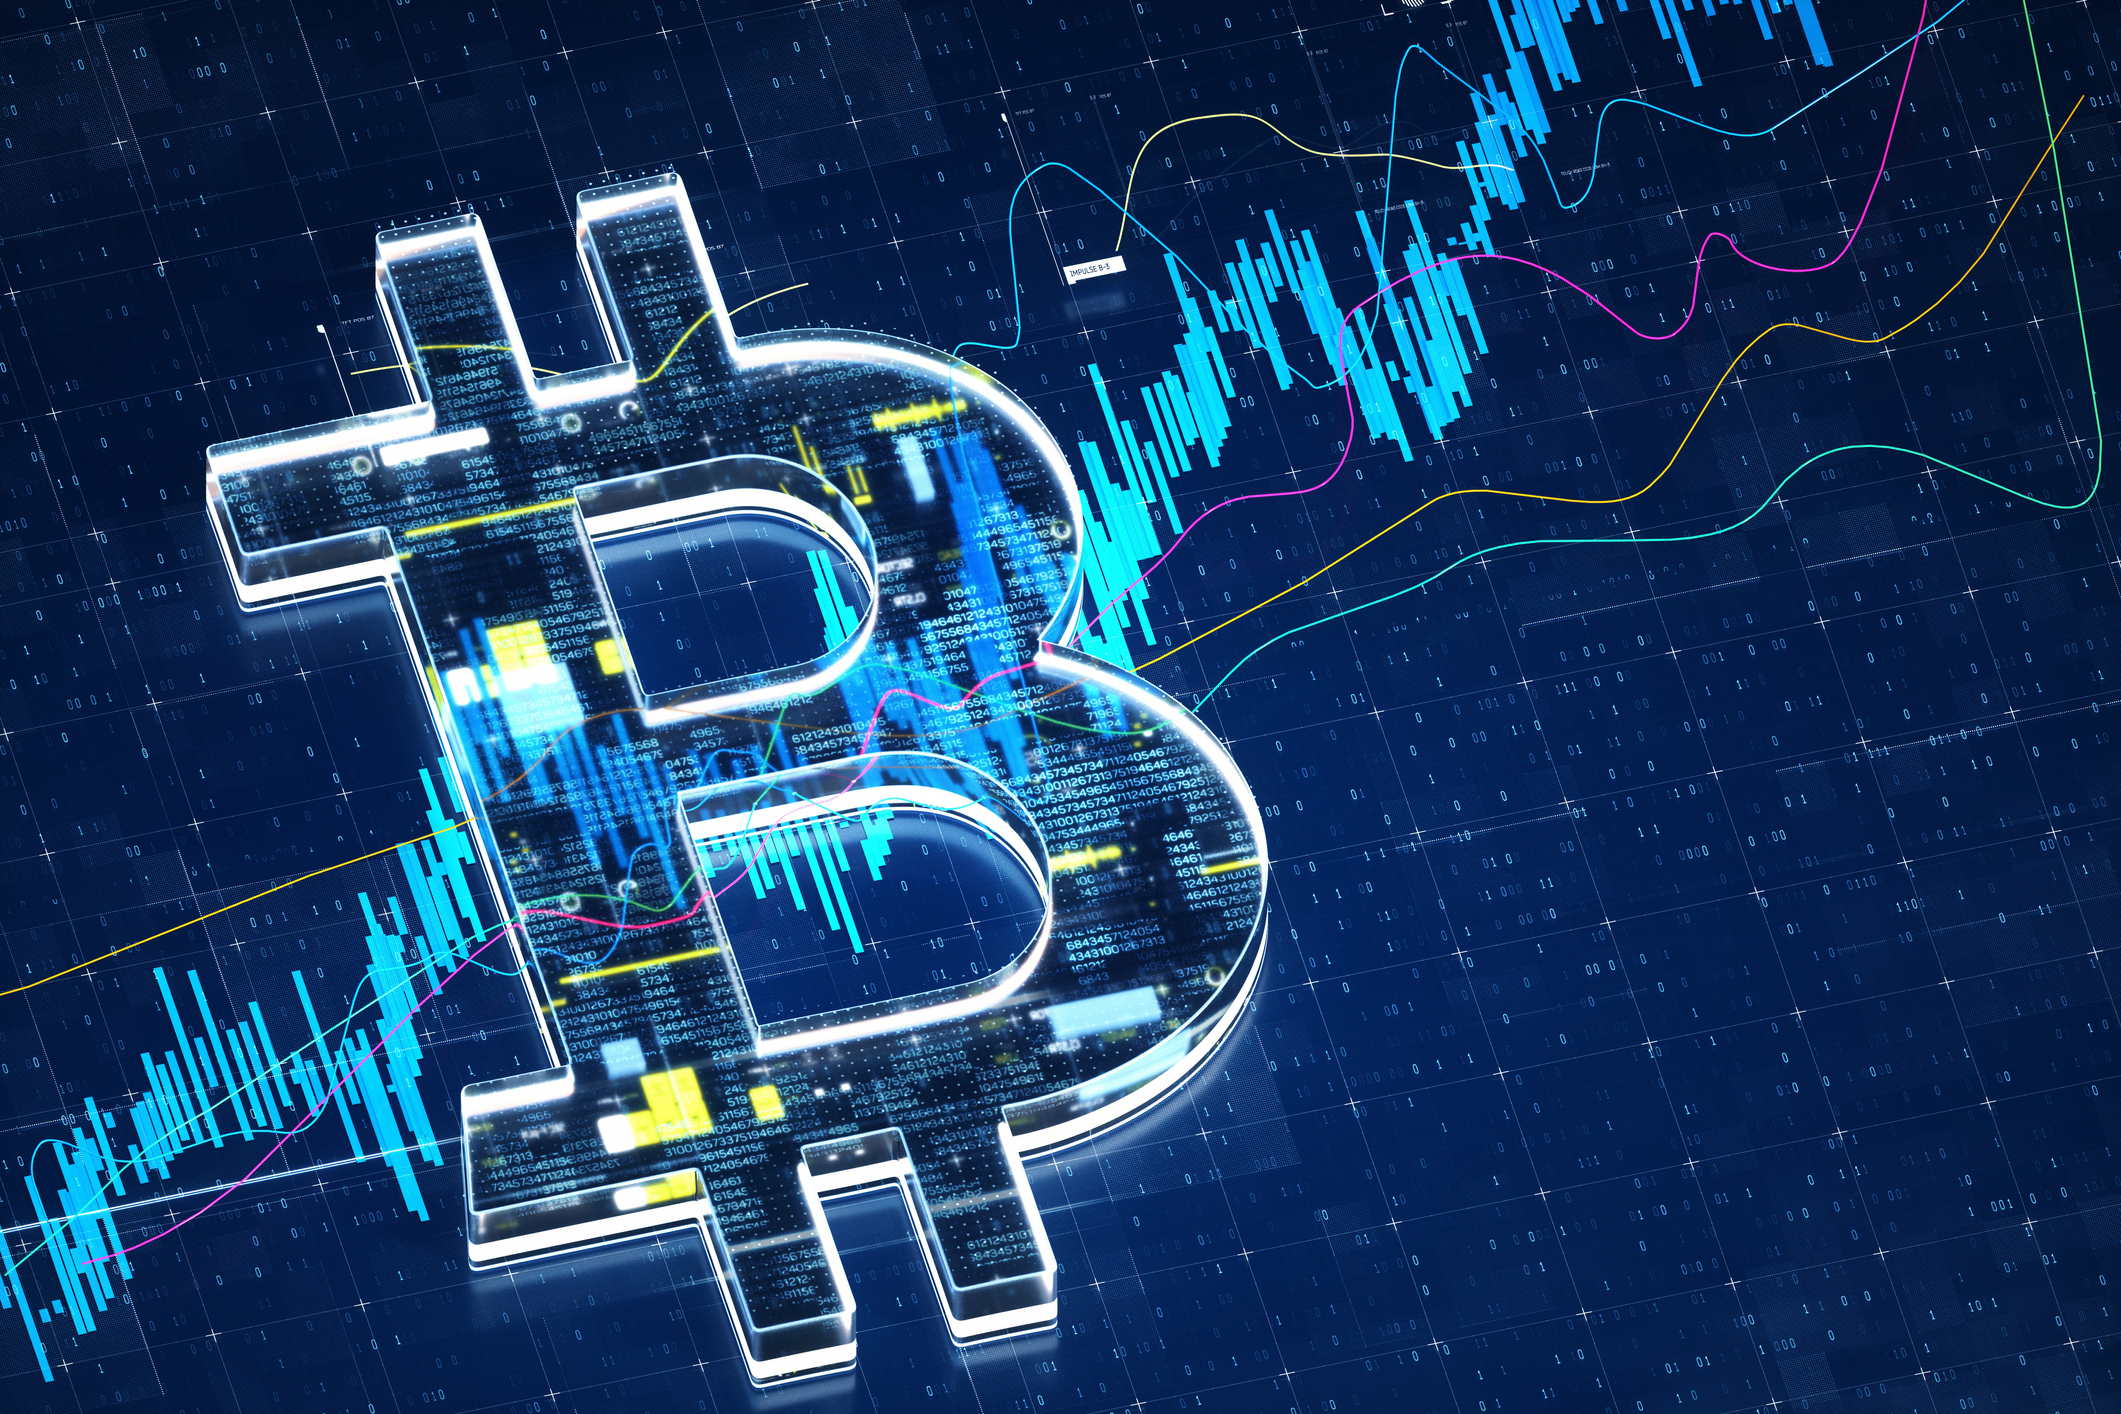 Digital generated image of Bitcoin sign stock market data on blue background. (Getty Images)